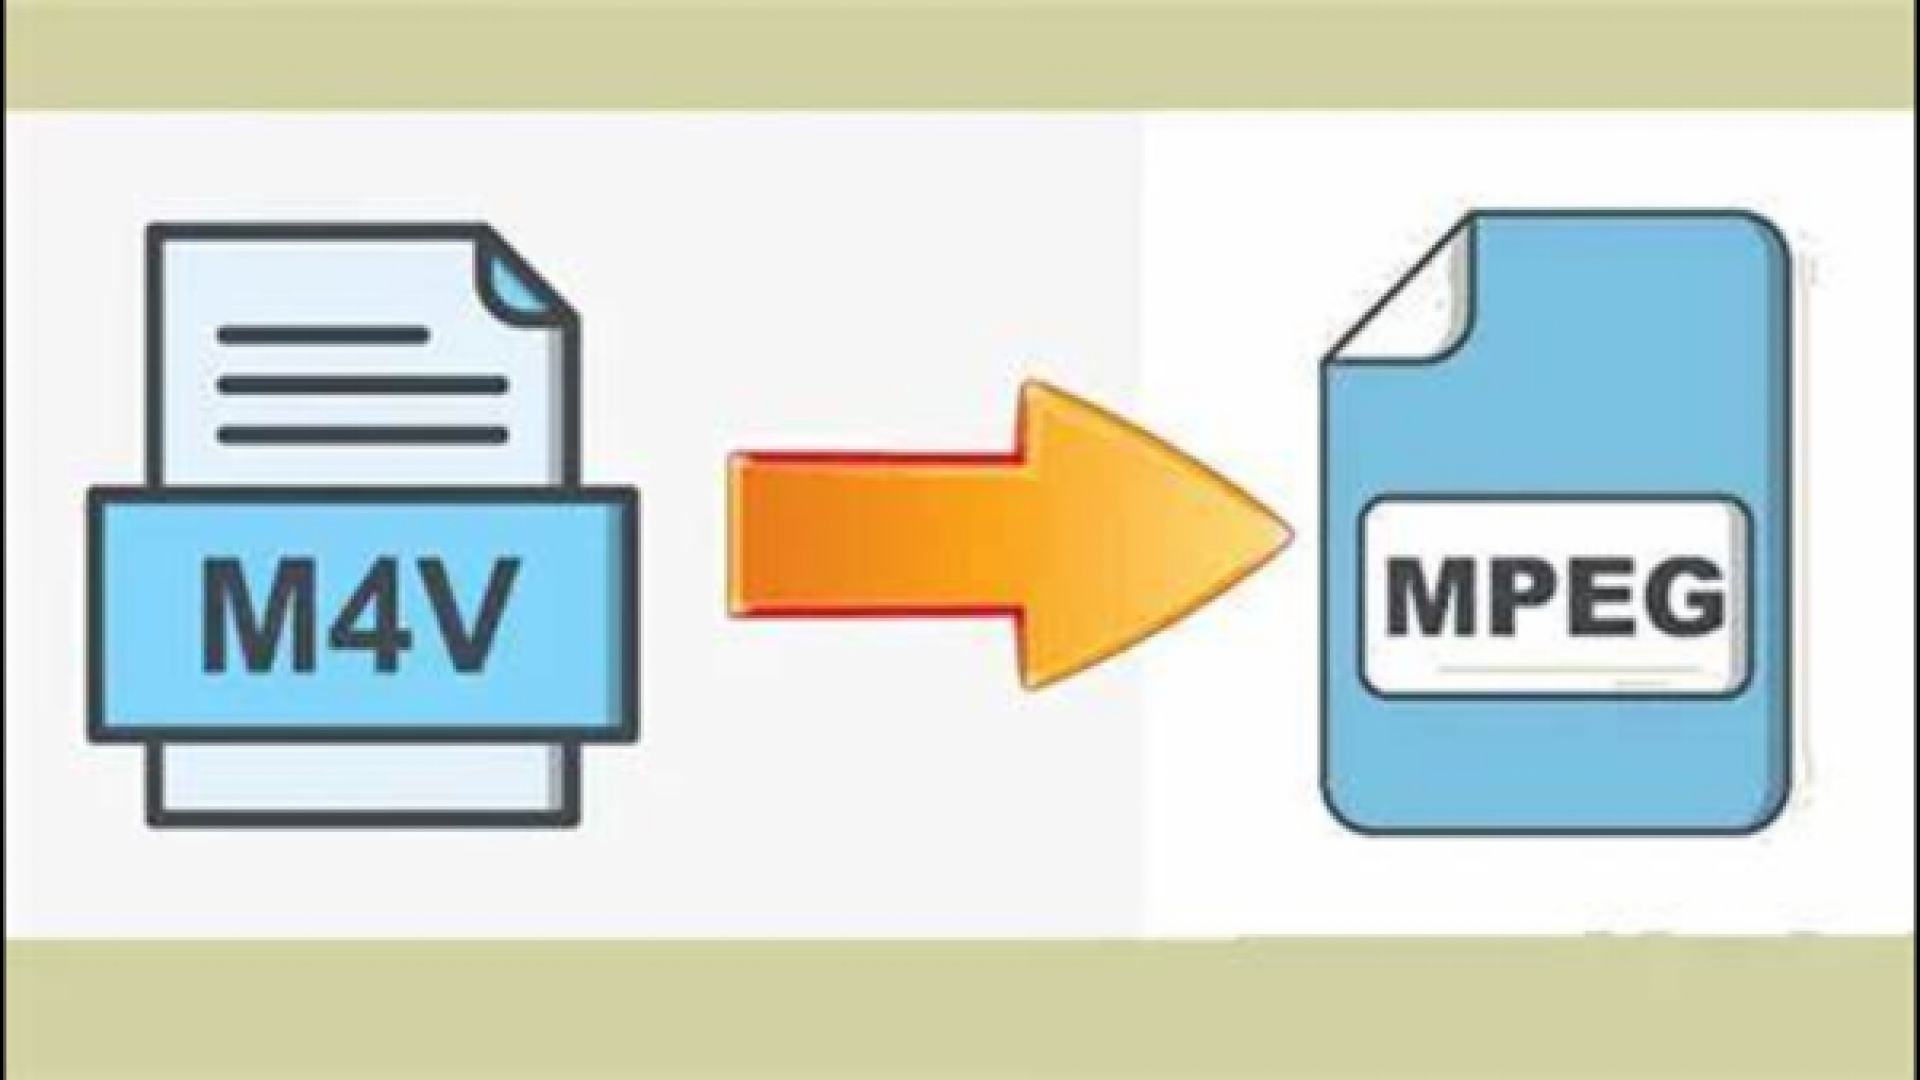 Best Way to Convert M4V to MPEG